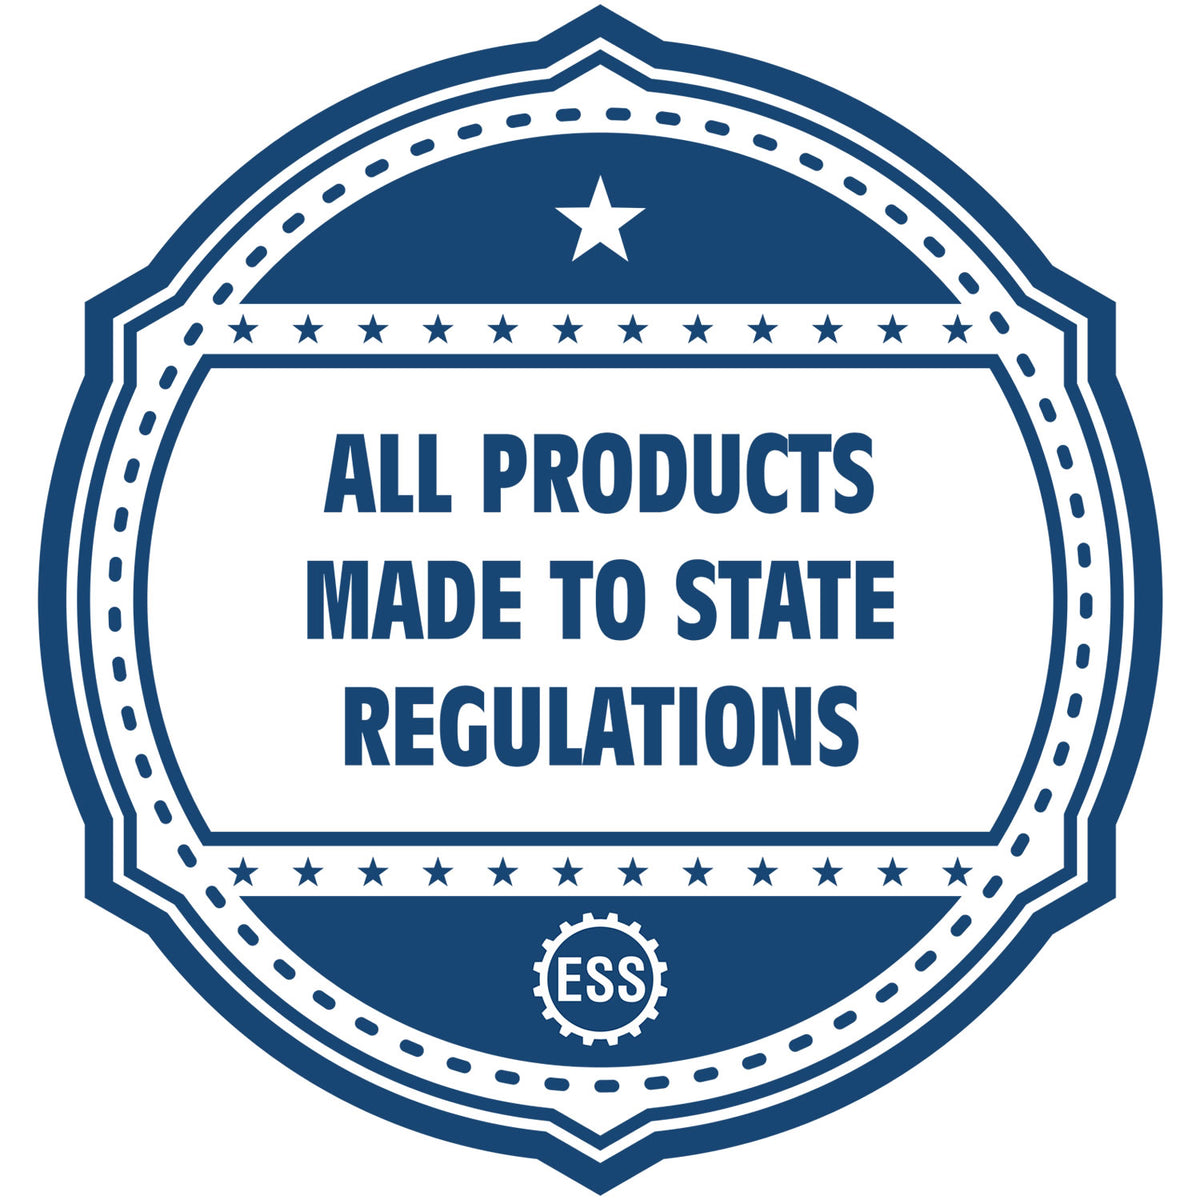 An icon or badge element for the Self-Inking State Seal Alabama Notary Stamp showing that this product is made in compliance with state regulations.